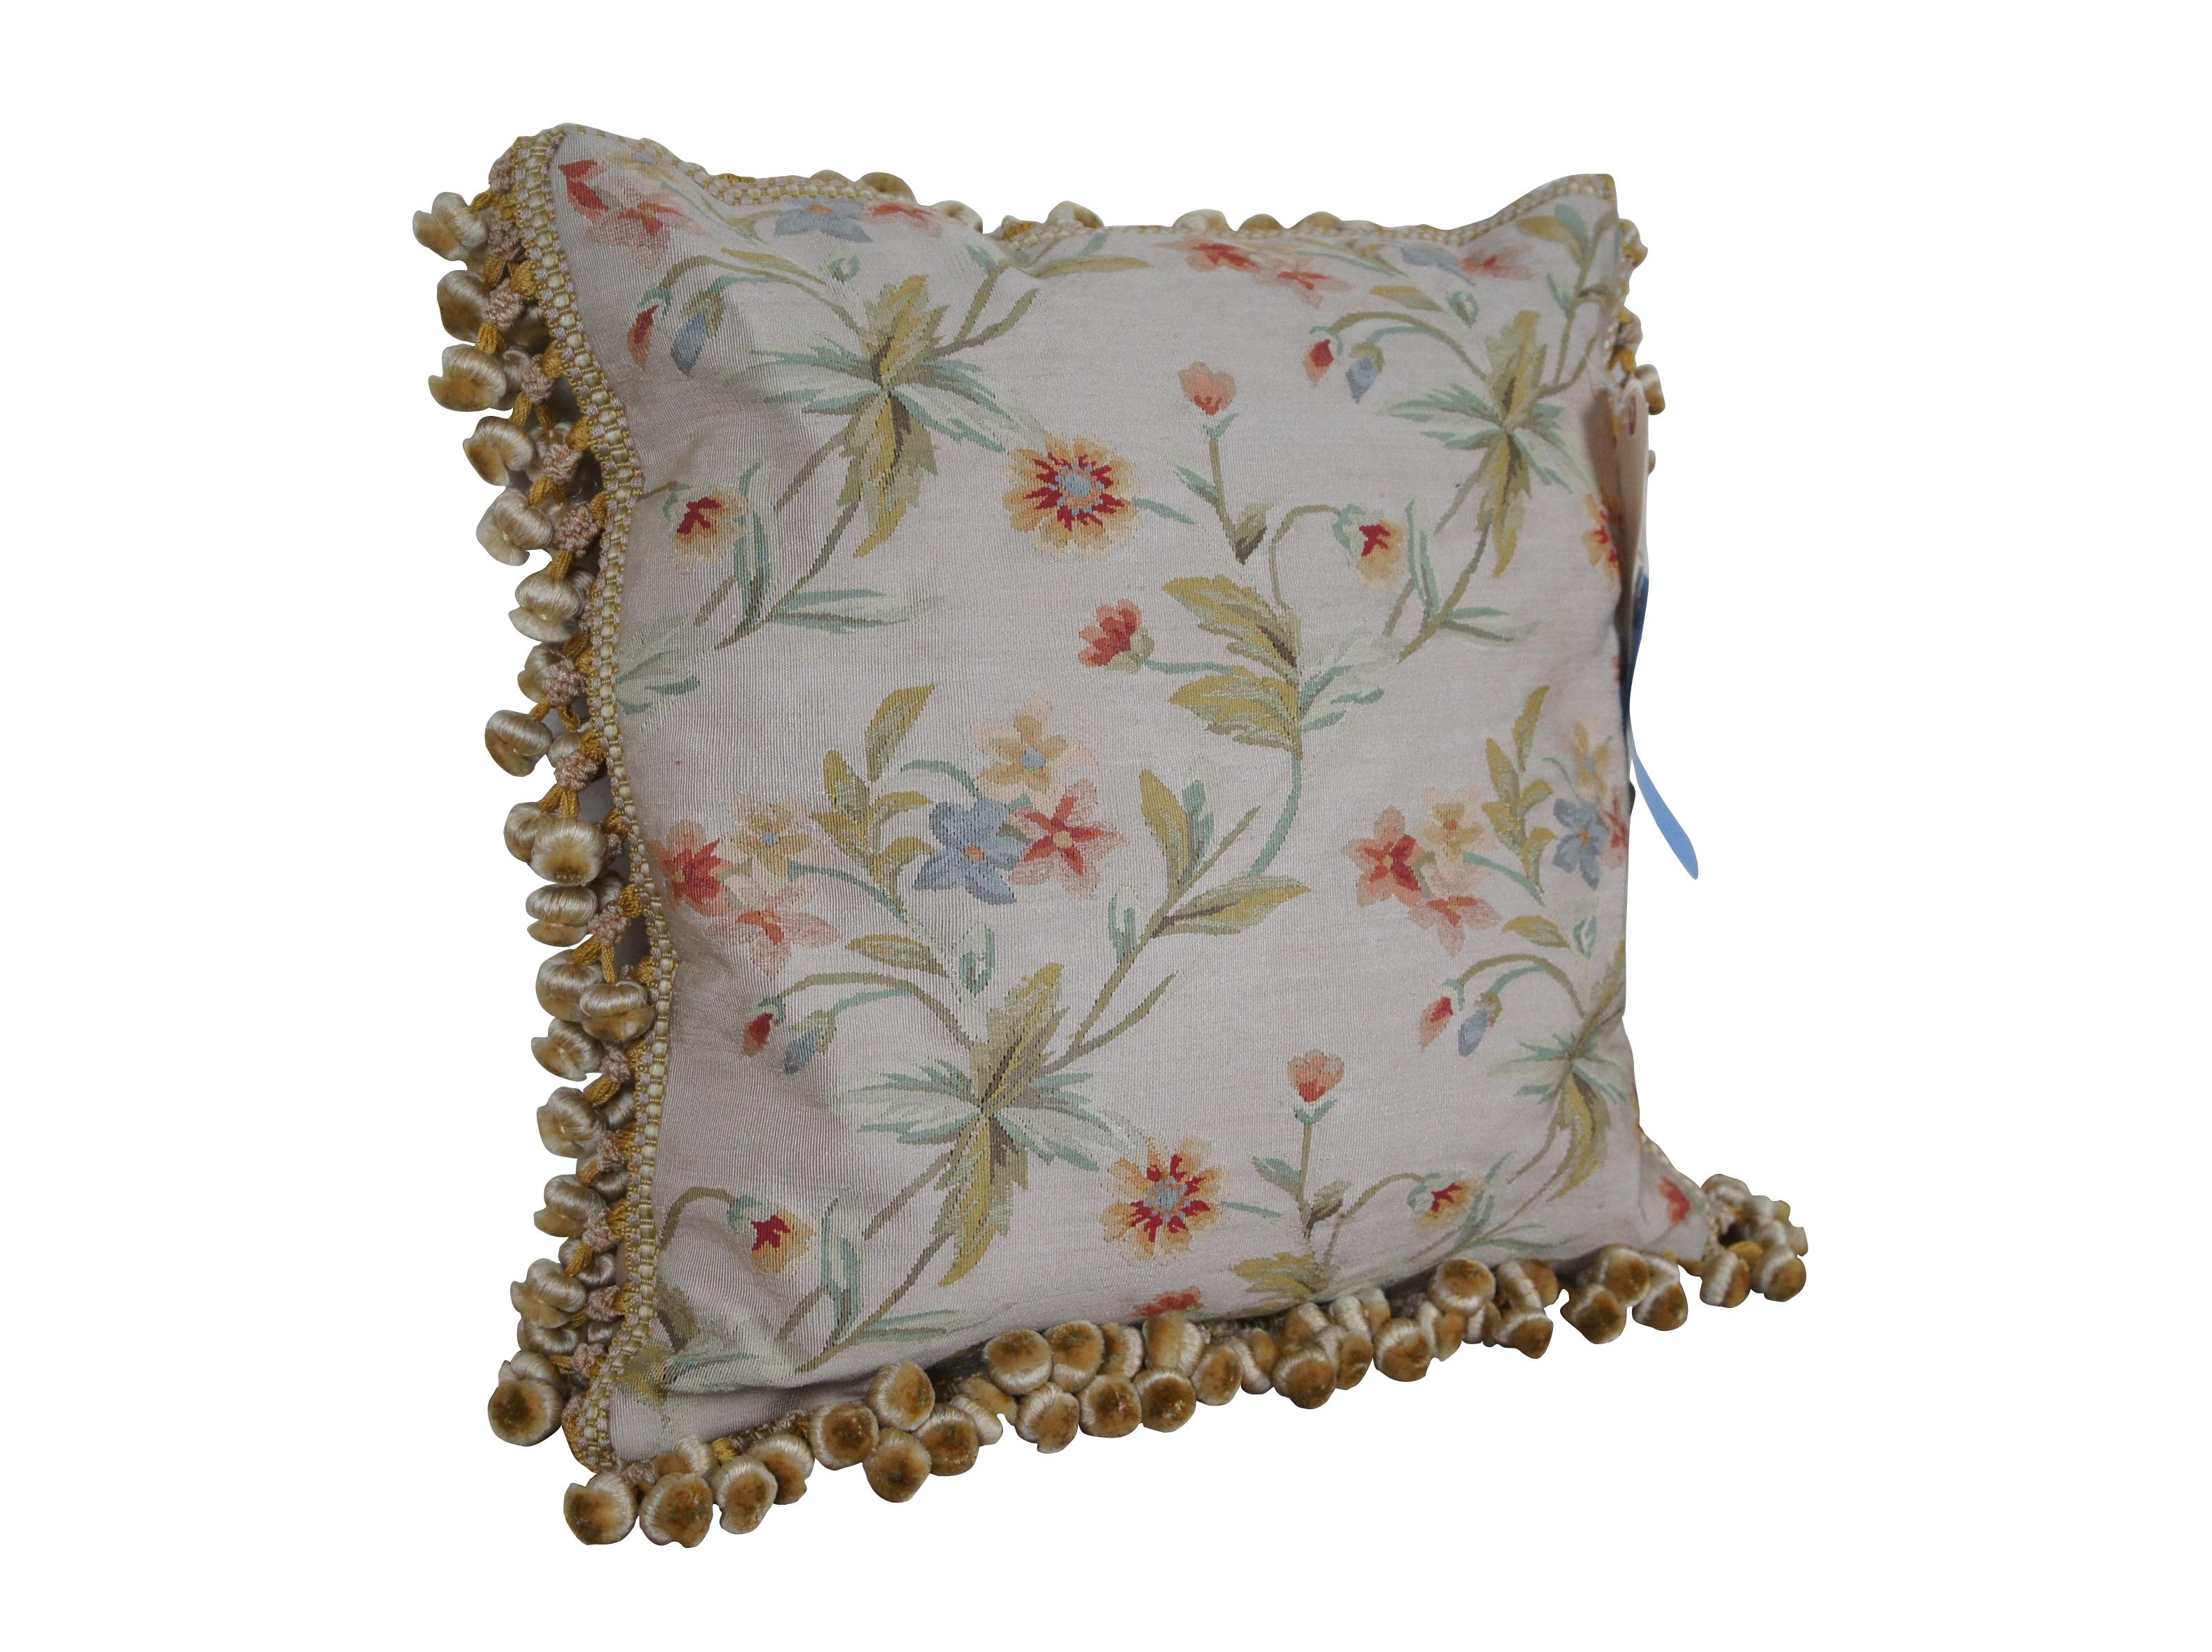 2 Available - 20th century square throw pillow, embroidered in silk with an array of cream, rusty pink, and blue flowers on green leafy stems. Gold and cream tassel trim. Light brown velour back with zipper closure. Down filled.

Dimensions:
18